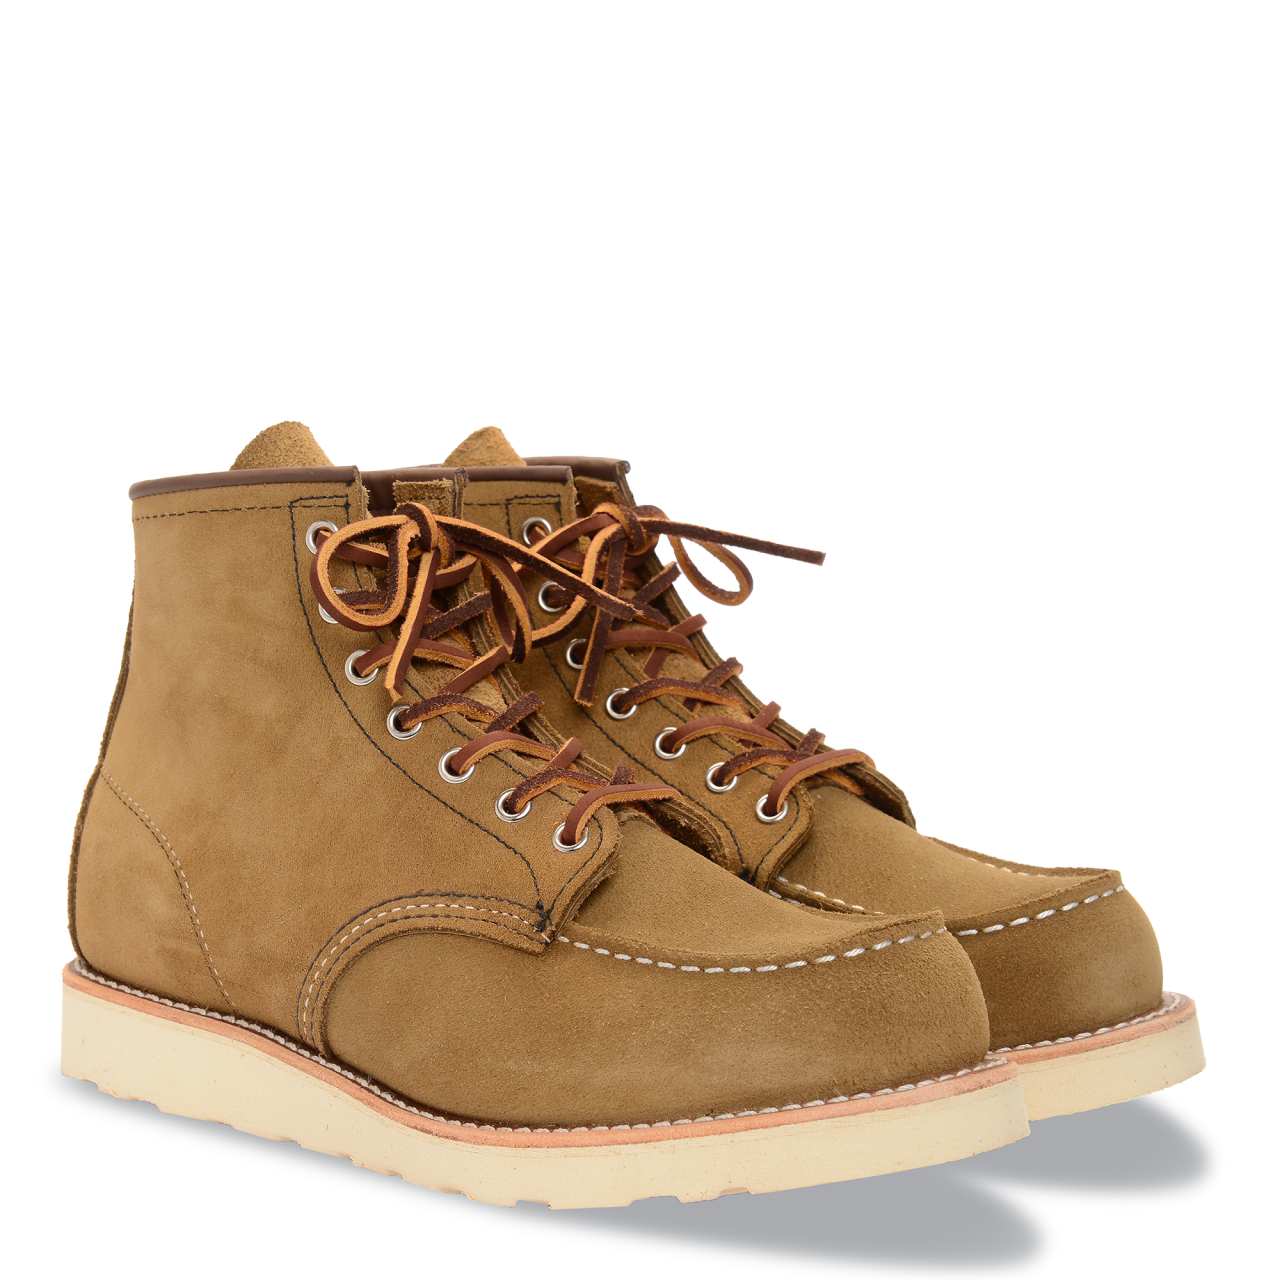 Red Wing 8881 Moc Toe